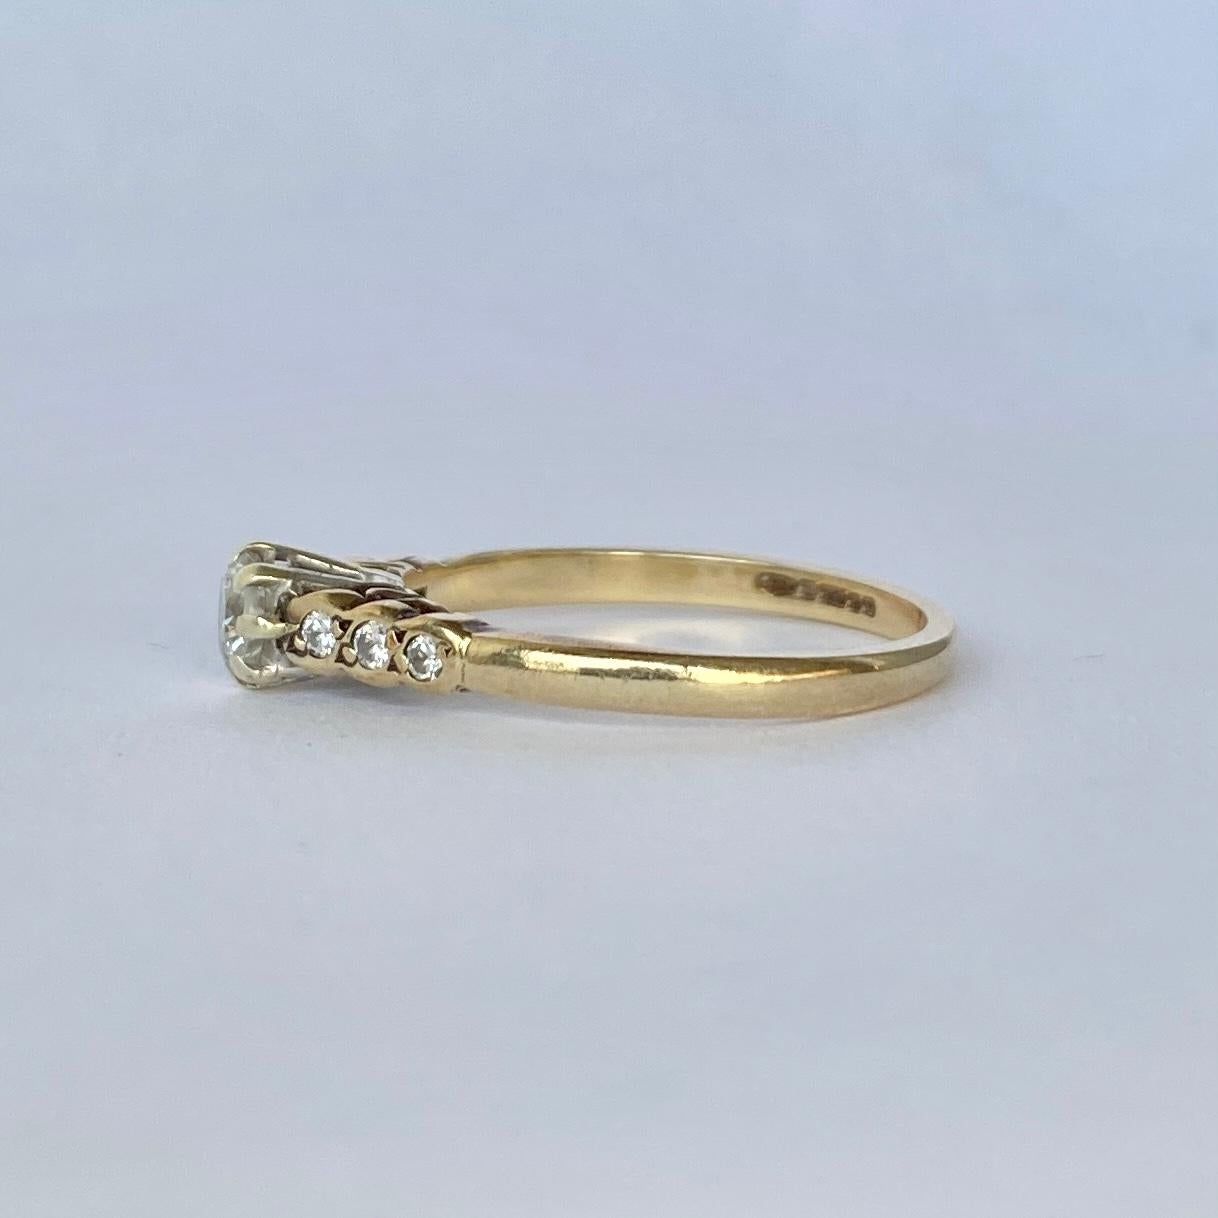 The design of the ring is so simple and beautiful. The central diamond measures 30pts and the shoulders hold diamonds which total 8pts per shoulder. Modelled in 9ct gold and made in Birmingham, England. 

Ring Size: L 1/2 or 6 
Height Off Finger: